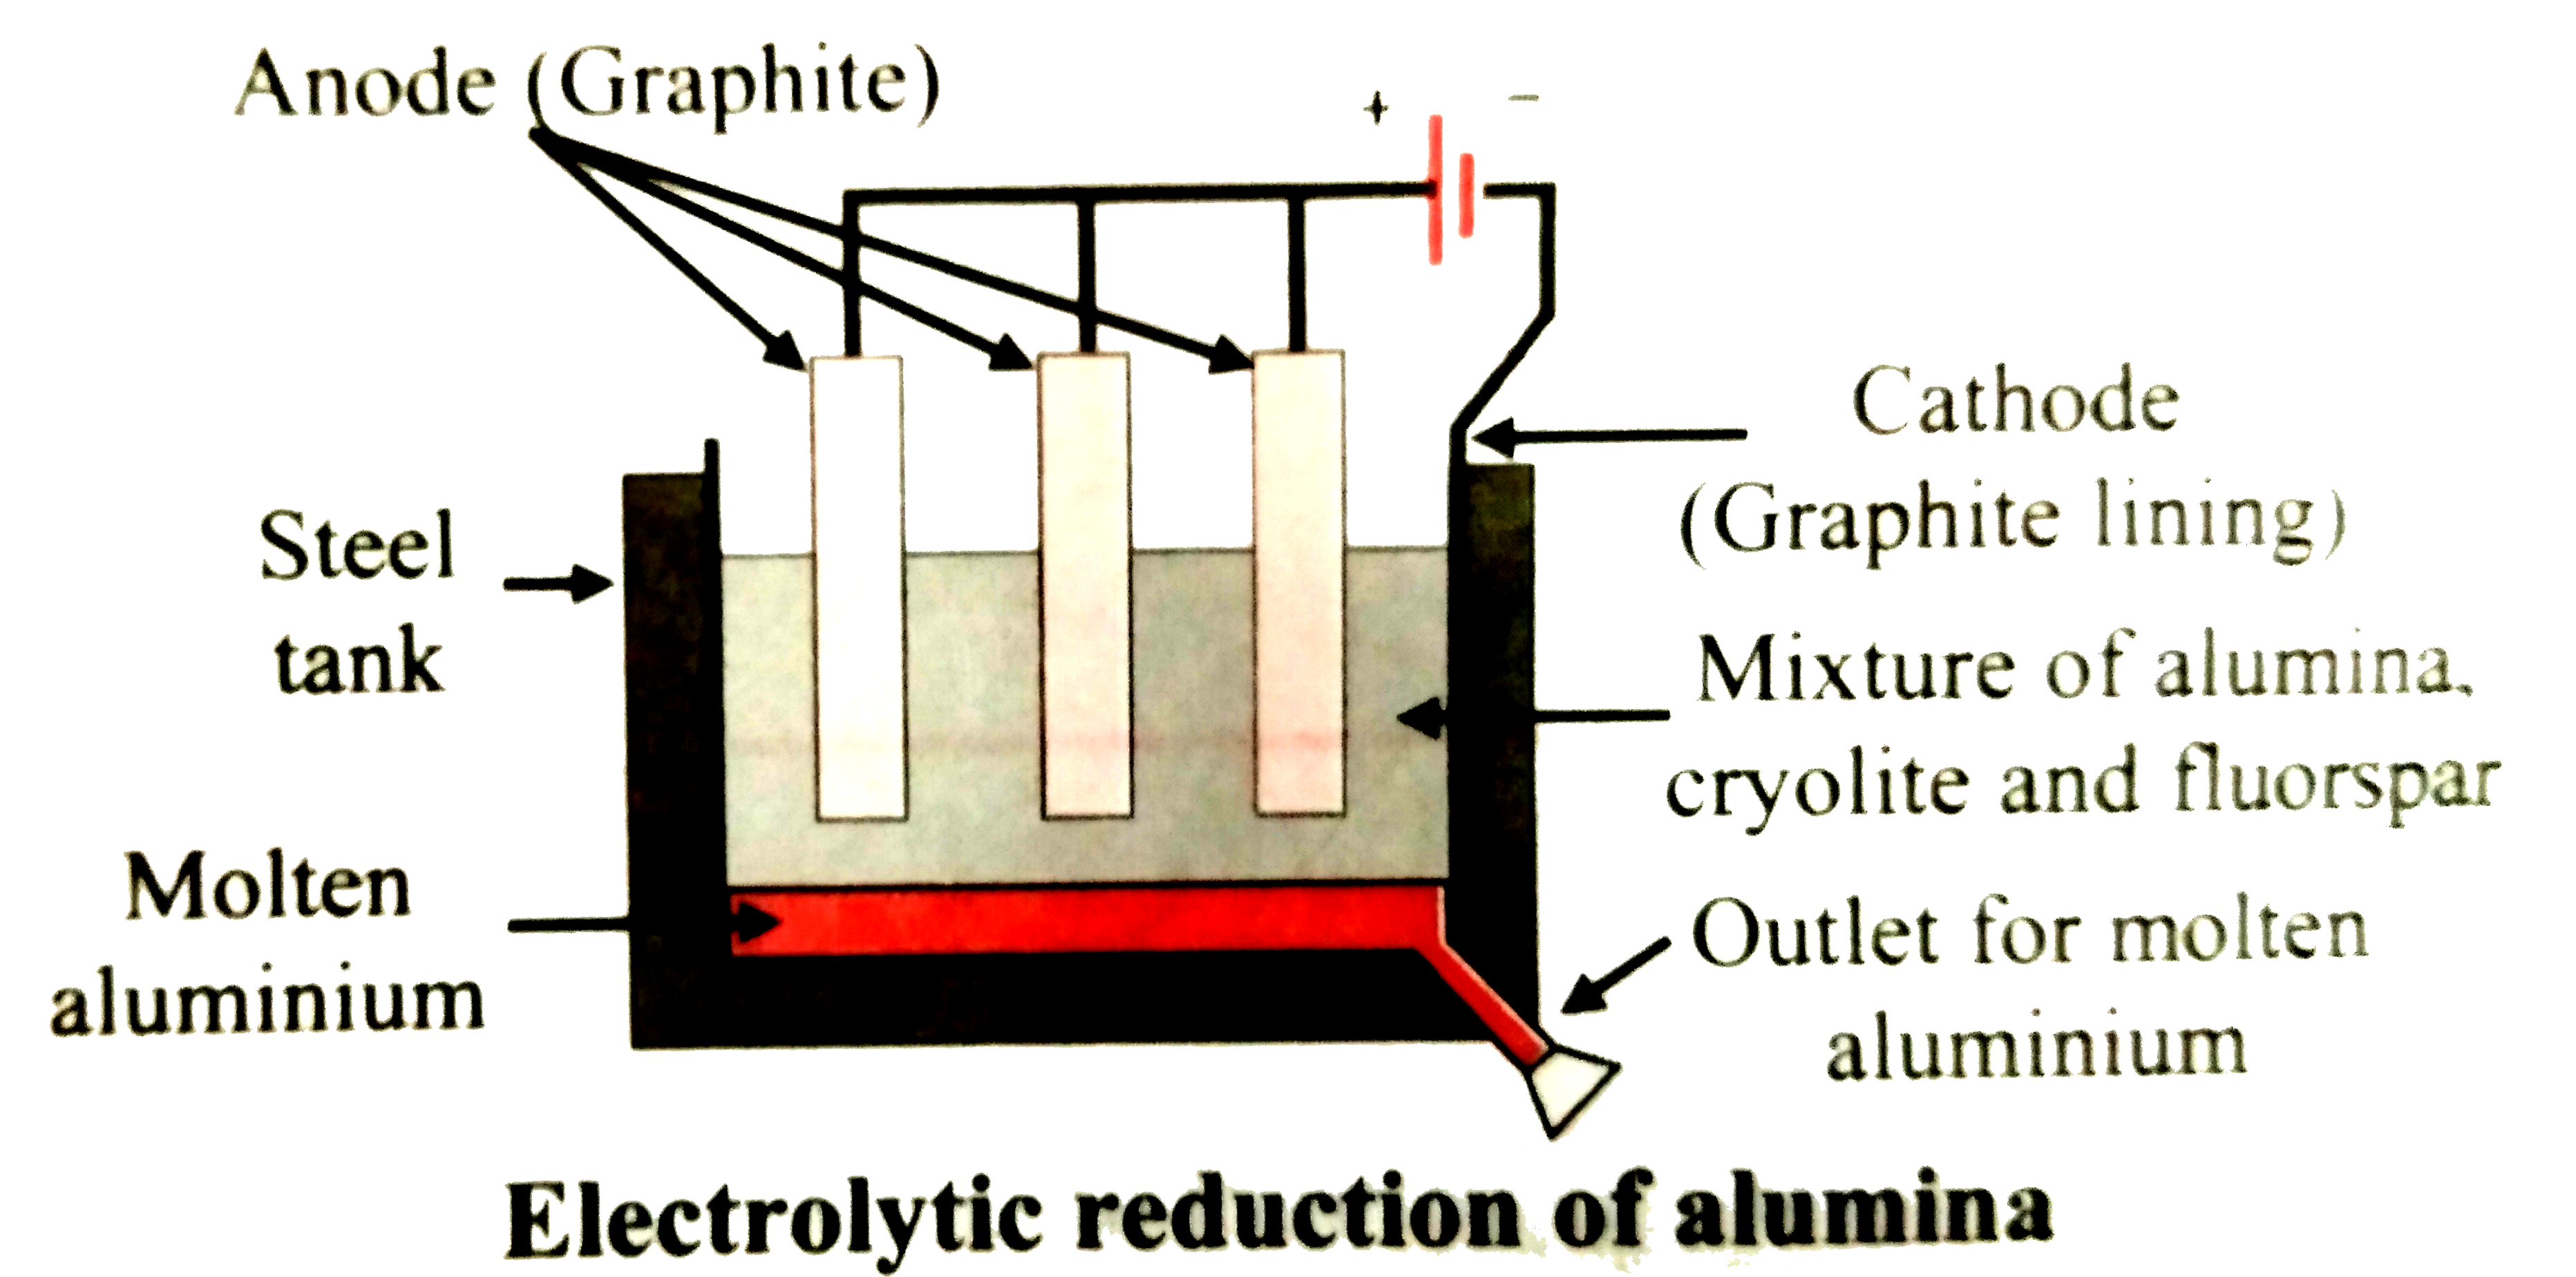 The adjacent figure represents electrolytic reduction of alumina.      What is the function of cryolite and fluorspar in this process ?